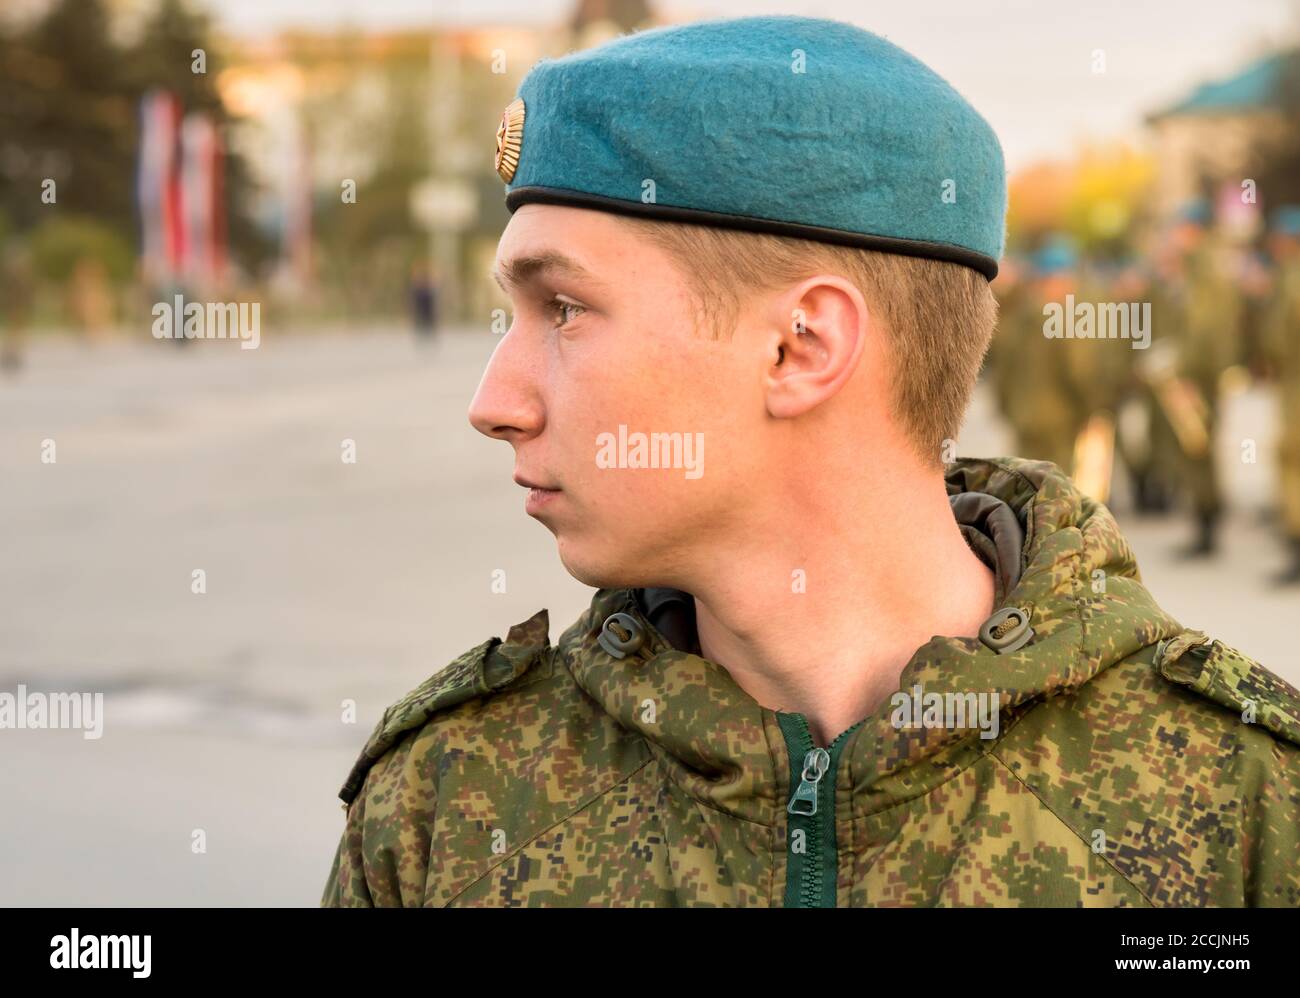 Pskov, Russian Federation - May 4, 2018: Portrait of young soldier of Special Armed Forces Russian military with blue beret on the square of Pskov, Ru Stock Photo